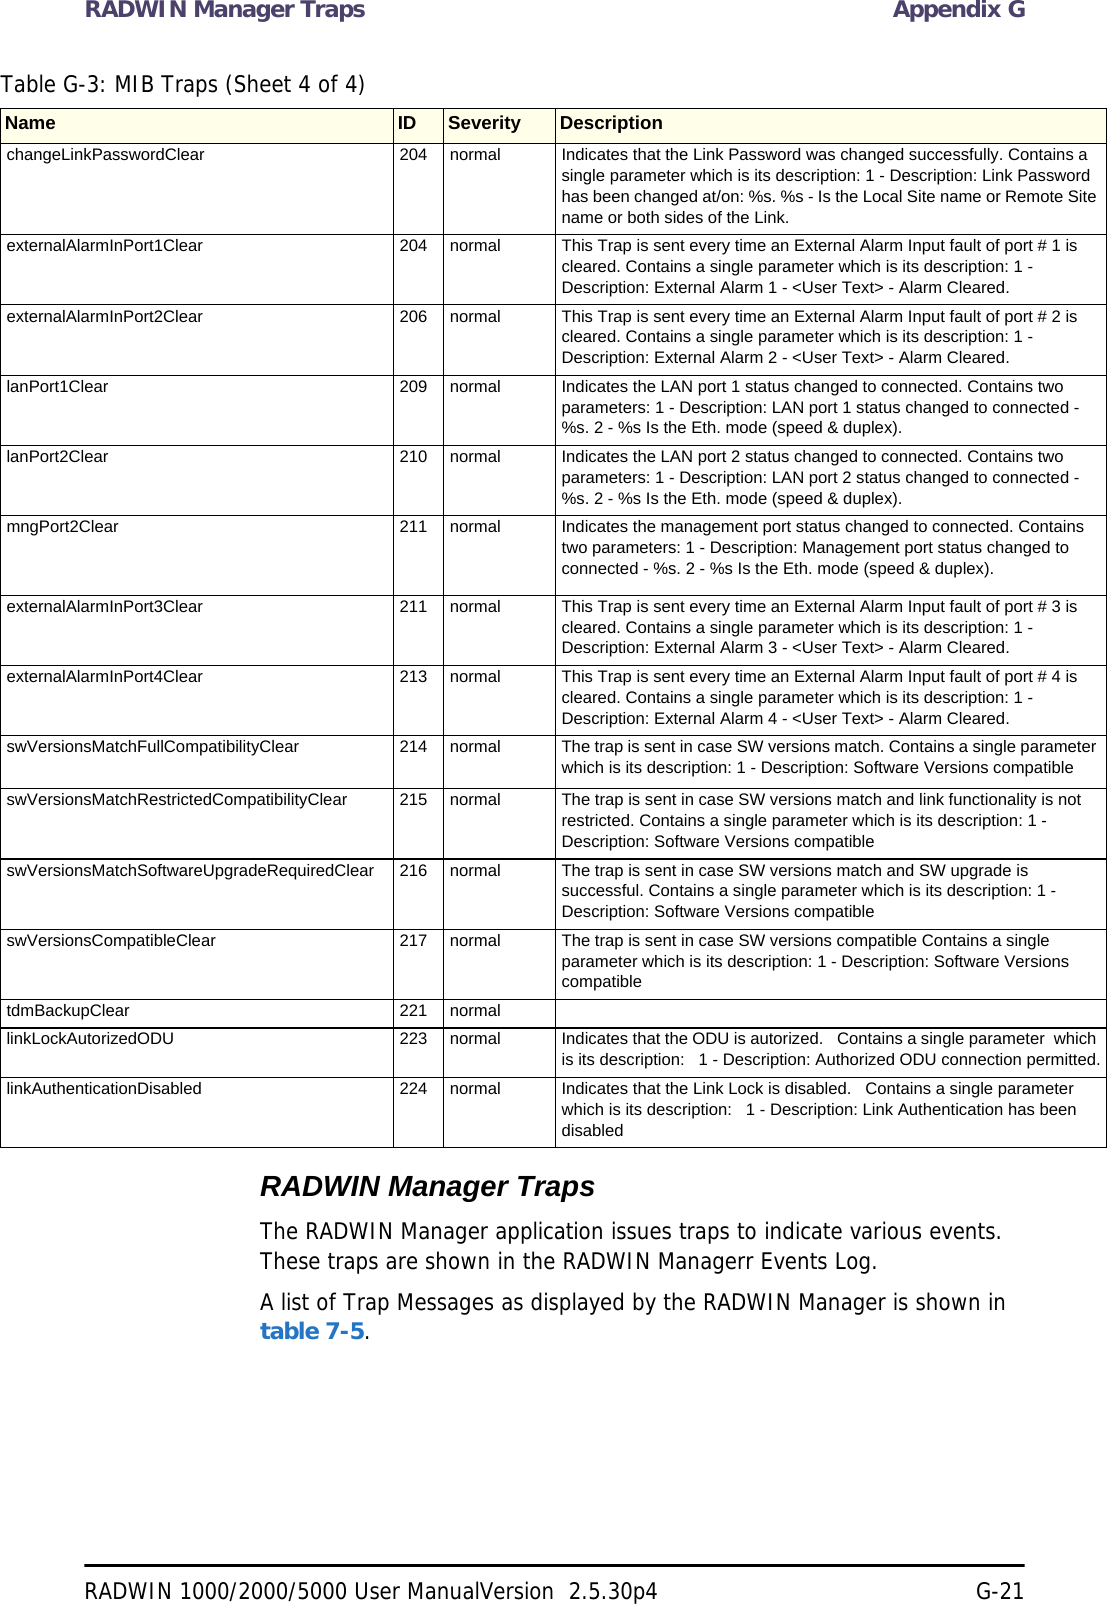 RADWIN Manager Traps Appendix GRADWIN 1000/2000/5000 User ManualVersion  2.5.30p4 G-21RADWIN Manager TrapsThe RADWIN Manager application issues traps to indicate various events. These traps are shown in the RADWIN Managerr Events Log.A list of Trap Messages as displayed by the RADWIN Manager is shown in table 7-5.changeLinkPasswordClear 204 normal Indicates that the Link Password was changed successfully. Contains a single parameter which is its description: 1 - Description: Link Password has been changed at/on: %s. %s - Is the Local Site name or Remote Site name or both sides of the Link. externalAlarmInPort1Clear 204 normal This Trap is sent every time an External Alarm Input fault of port # 1 is cleared. Contains a single parameter which is its description: 1 - Description: External Alarm 1 - &lt;User Text&gt; - Alarm Cleared. externalAlarmInPort2Clear 206 normal This Trap is sent every time an External Alarm Input fault of port # 2 is cleared. Contains a single parameter which is its description: 1 - Description: External Alarm 2 - &lt;User Text&gt; - Alarm Cleared. lanPort1Clear 209 normal Indicates the LAN port 1 status changed to connected. Contains two parameters: 1 - Description: LAN port 1 status changed to connected - %s. 2 - %s Is the Eth. mode (speed &amp; duplex). lanPort2Clear 210 normal Indicates the LAN port 2 status changed to connected. Contains two parameters: 1 - Description: LAN port 2 status changed to connected - %s. 2 - %s Is the Eth. mode (speed &amp; duplex). mngPort2Clear 211 normal Indicates the management port status changed to connected. Contains two parameters: 1 - Description: Management port status changed to connected - %s. 2 - %s Is the Eth. mode (speed &amp; duplex). externalAlarmInPort3Clear 211 normal This Trap is sent every time an External Alarm Input fault of port # 3 is cleared. Contains a single parameter which is its description: 1 - Description: External Alarm 3 - &lt;User Text&gt; - Alarm Cleared. externalAlarmInPort4Clear 213 normal This Trap is sent every time an External Alarm Input fault of port # 4 is cleared. Contains a single parameter which is its description: 1 - Description: External Alarm 4 - &lt;User Text&gt; - Alarm Cleared. swVersionsMatchFullCompatibilityClear 214 normal The trap is sent in case SW versions match. Contains a single parameter which is its description: 1 - Description: Software Versions compatible swVersionsMatchRestrictedCompatibilityClear 215 normal The trap is sent in case SW versions match and link functionality is not restricted. Contains a single parameter which is its description: 1 - Description: Software Versions compatible swVersionsMatchSoftwareUpgradeRequiredClear 216 normal The trap is sent in case SW versions match and SW upgrade is successful. Contains a single parameter which is its description: 1 - Description: Software Versions compatible swVersionsCompatibleClear 217 normal The trap is sent in case SW versions compatible Contains a single parameter which is its description: 1 - Description: Software Versions compatible tdmBackupClear 221 normallinkLockAutorizedODU 223 normal Indicates that the ODU is autorized.   Contains a single parameter  which is its description:   1 - Description: Authorized ODU connection permitted.linkAuthenticationDisabled 224 normal Indicates that the Link Lock is disabled.   Contains a single parameter  which is its description:   1 - Description: Link Authentication has been disabledTable G-3: MIB Traps (Sheet 4 of 4)Name ID Severity Description